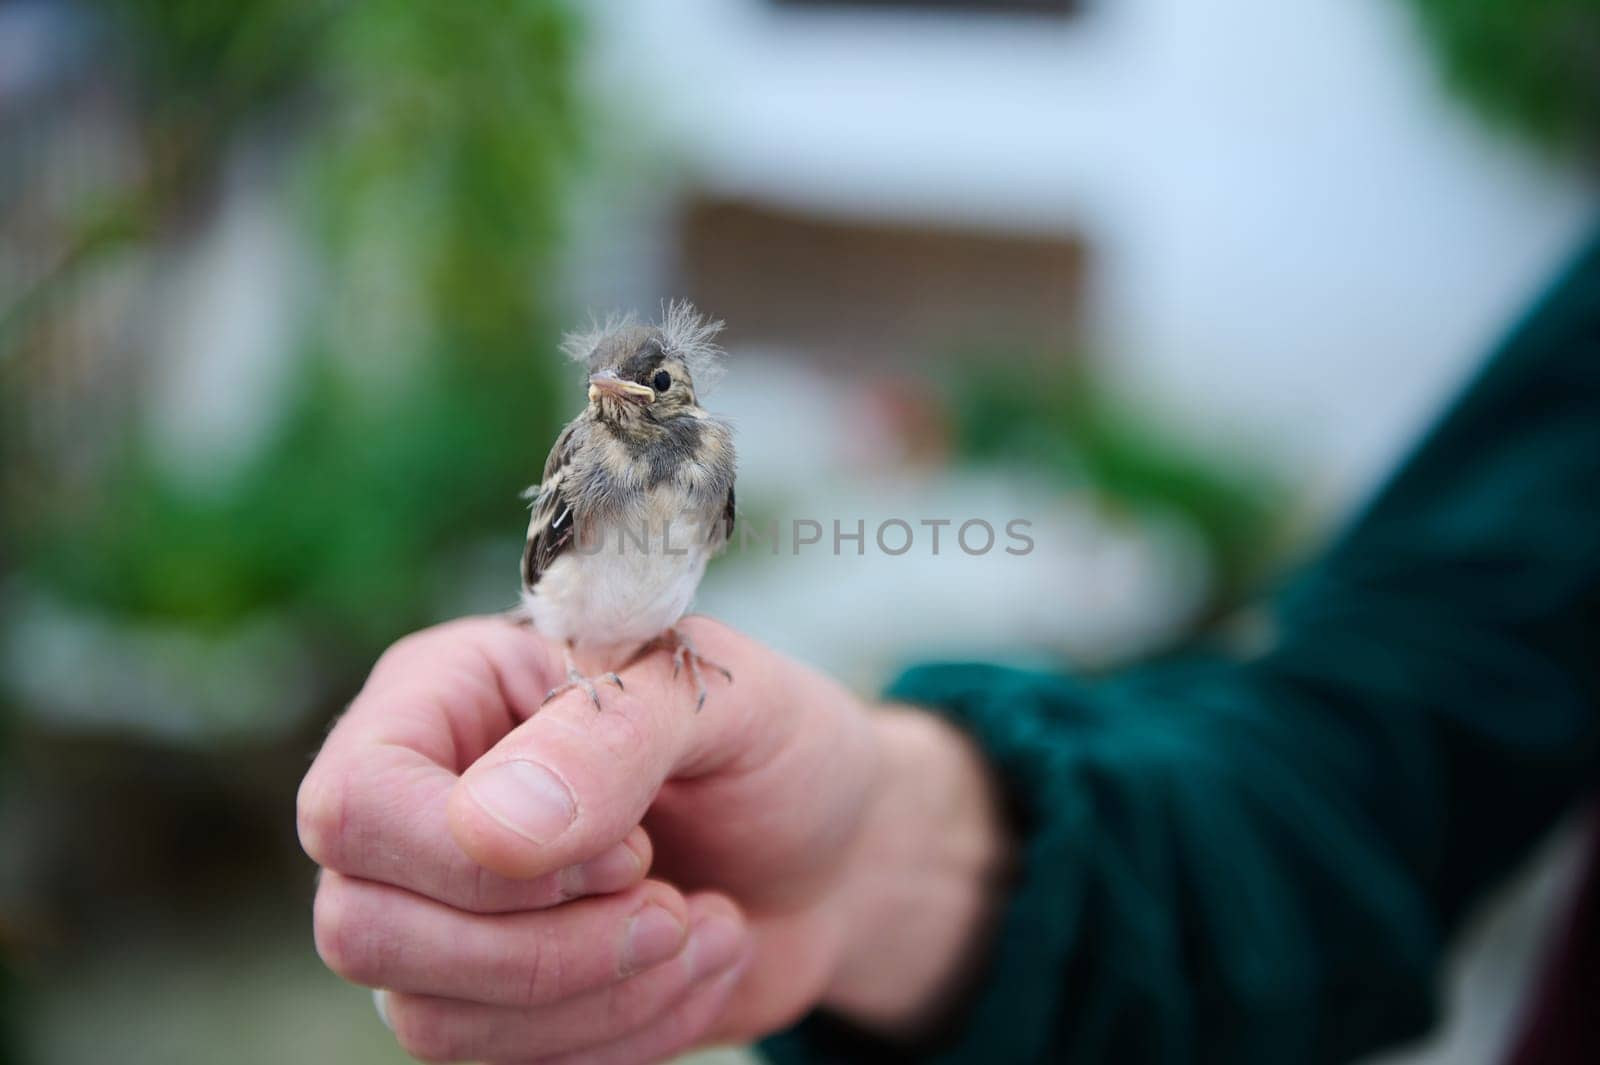 Close-up view of a small baby bird sitting in the hands of a man. People and animals themes by artgf